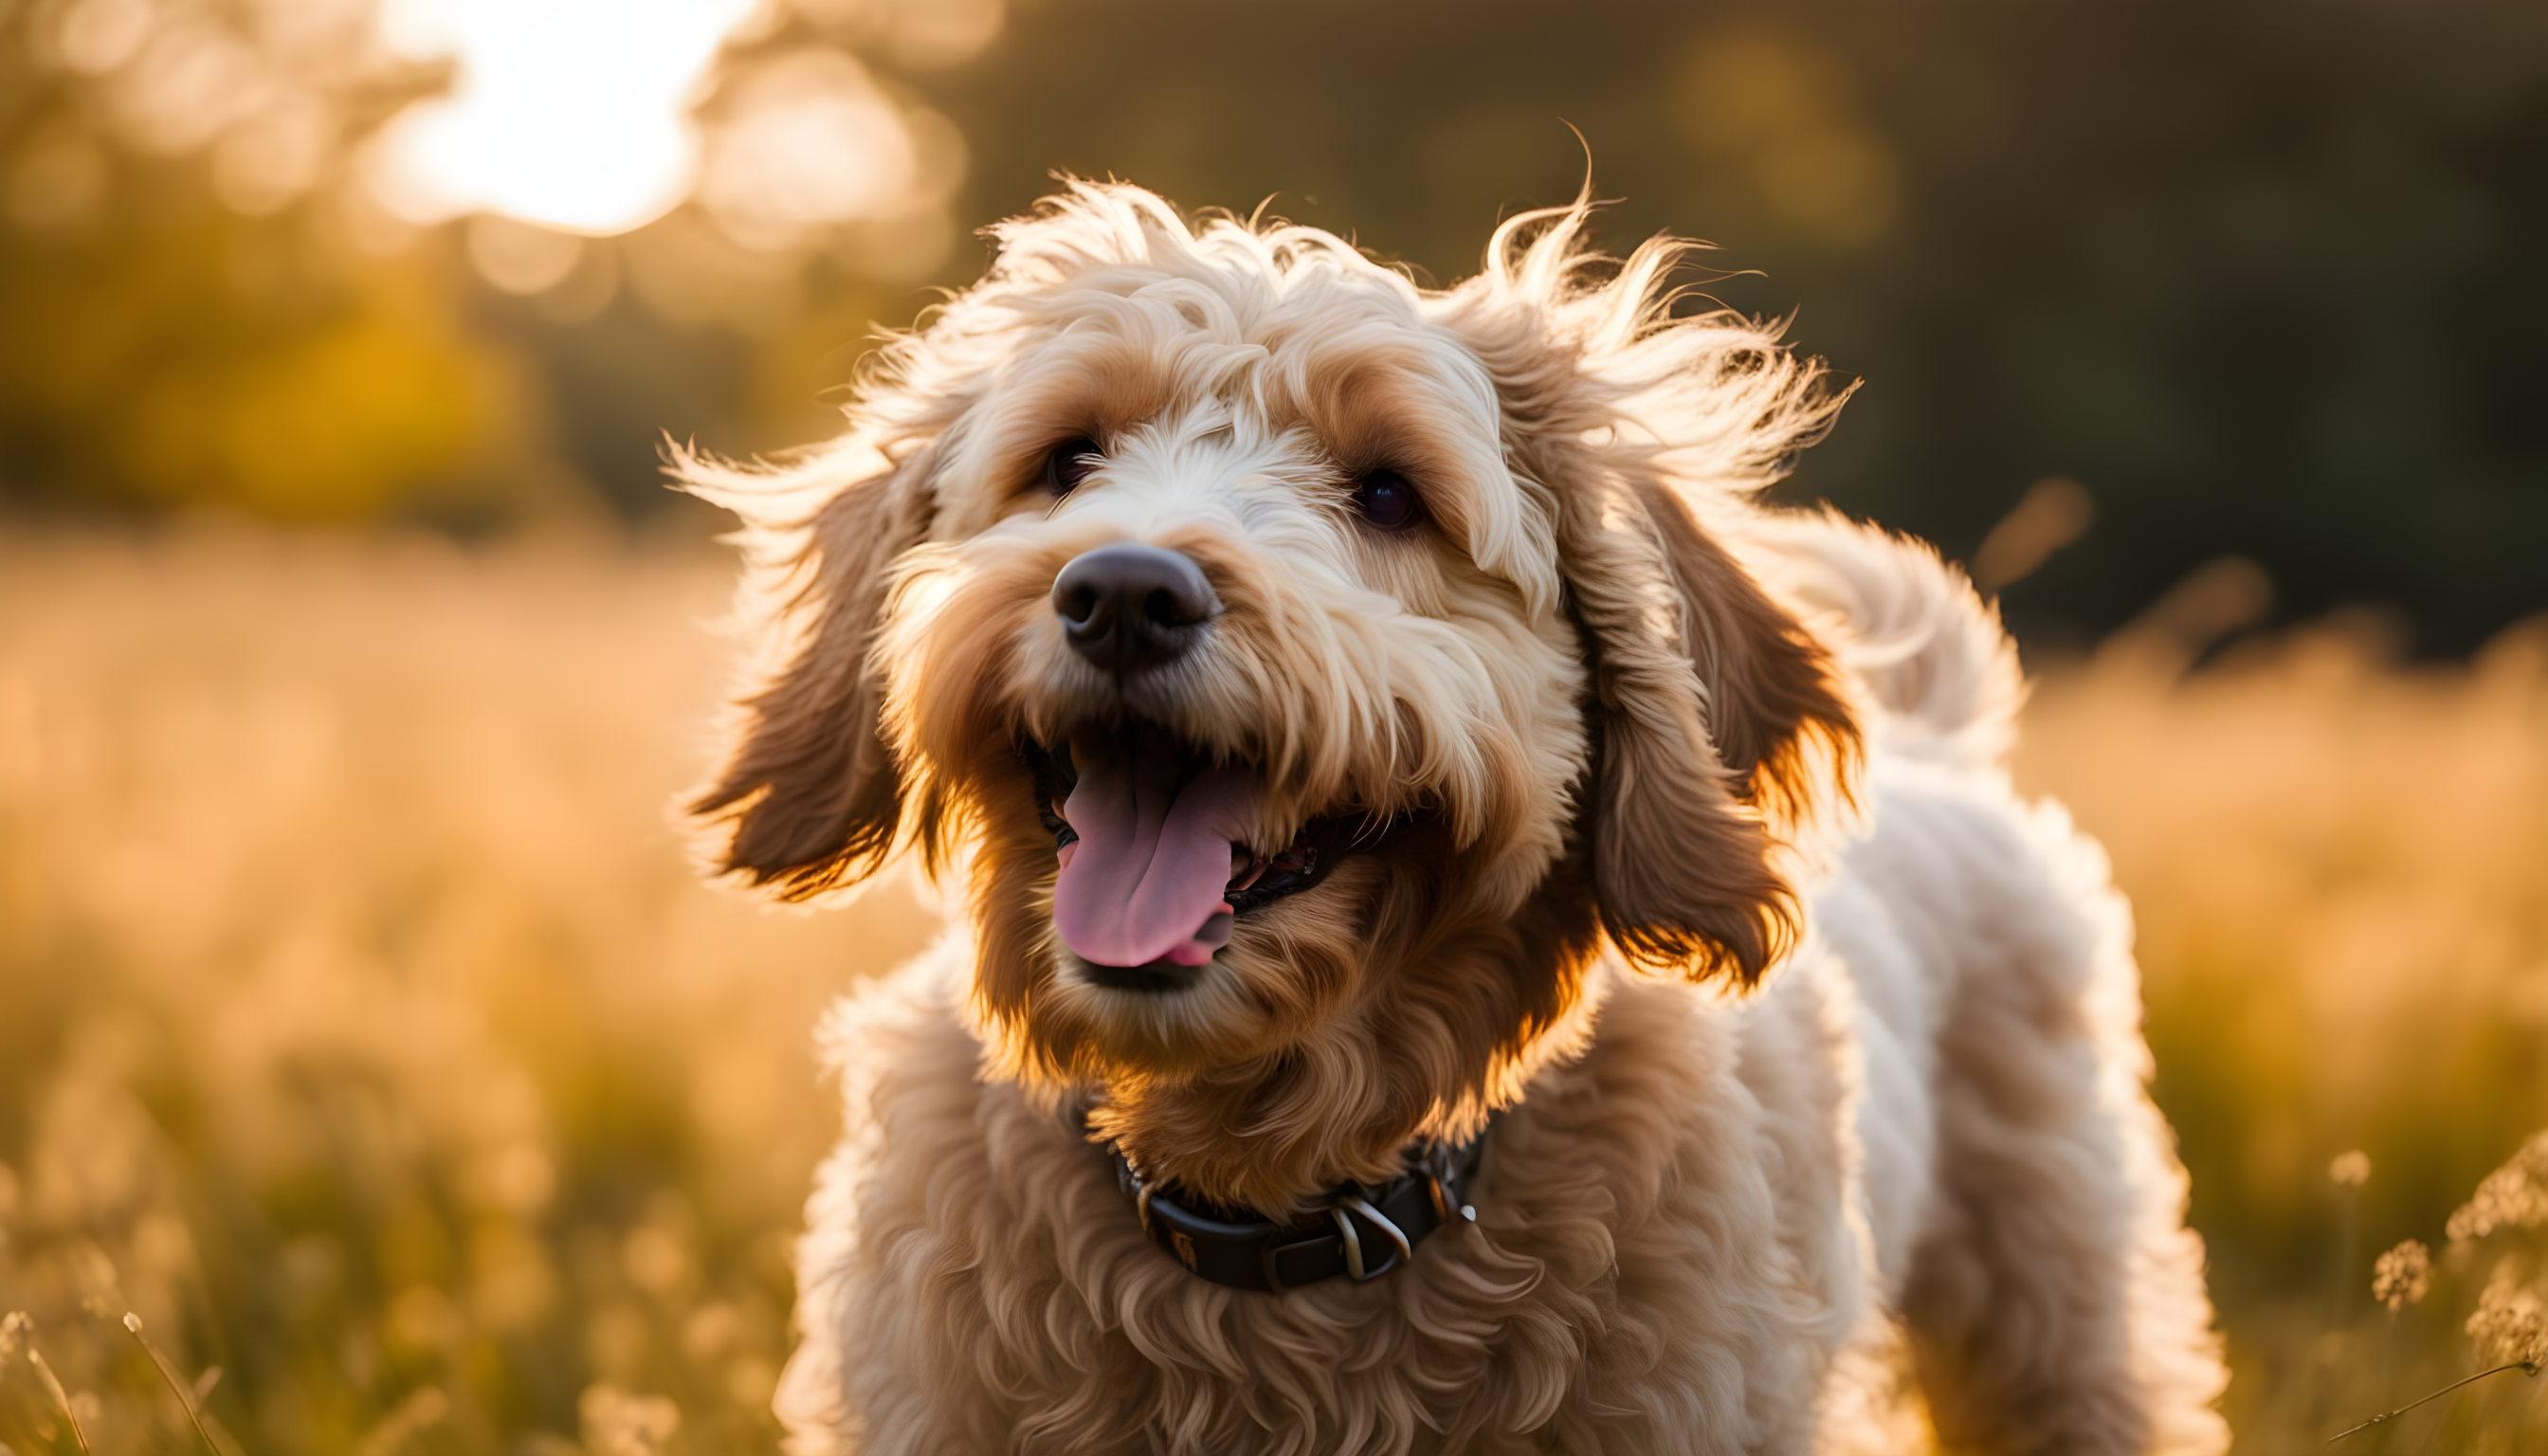 A joyful Labradoodle frolicking in a field, radiating happiness and well-being.